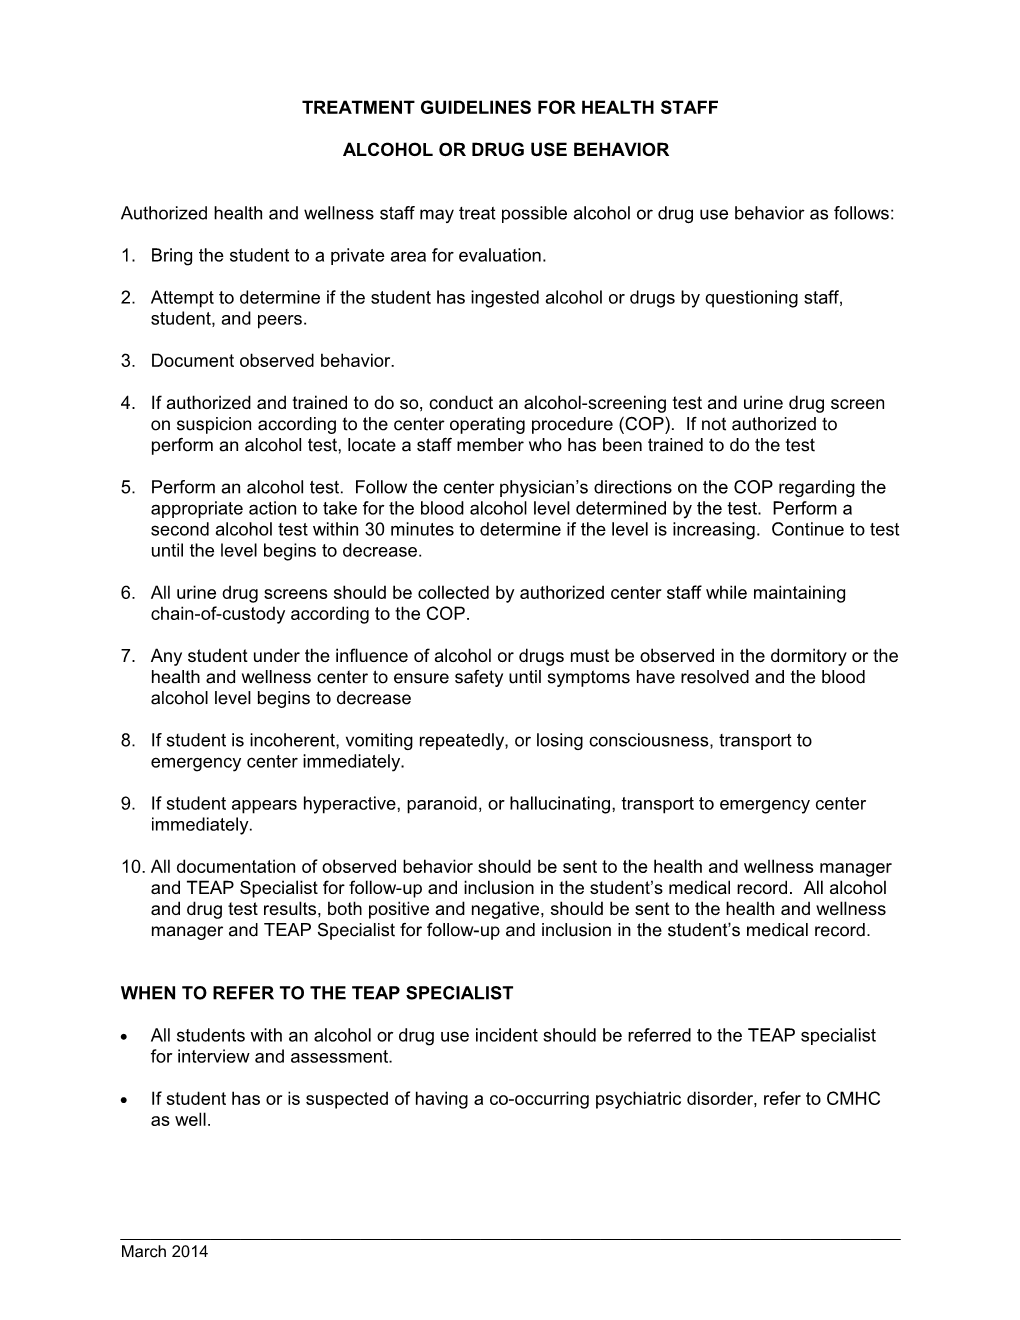 Treatment Guidelines for Health Staff: Alcohol and Drug Use Behavior